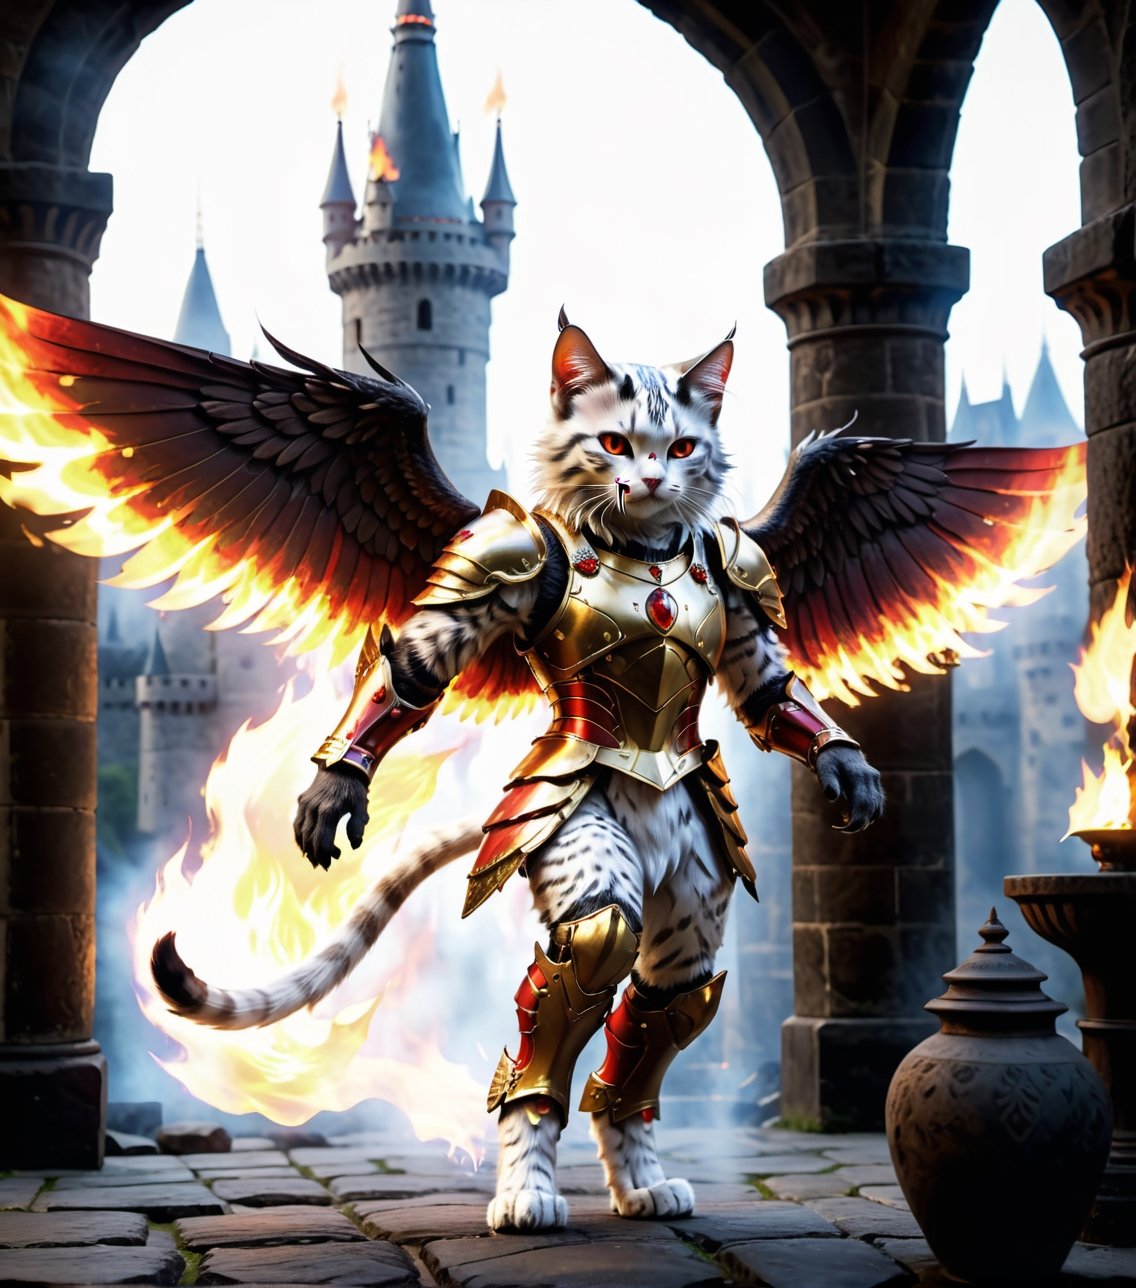 (16k), (masterpiece), (full body shot,), (highest quality), (highly complex), (realistic), (sharp focus), (cinematic lighting), (highly detailed), (full body shot,) , In a magnificent castle filled with golden decorations, White cat, Anthropomorphic, Standing on two legs, Cat wearing fiery red gem-encrusted armor, Fiery red wings inlaid with gems, Metal wings emit flames, accurate anatomical body and hands, hands radiating fire, delicate features, Red eyes, eyes radiating fire, Perfect cat body proportions, realistic, cat,ral-lava